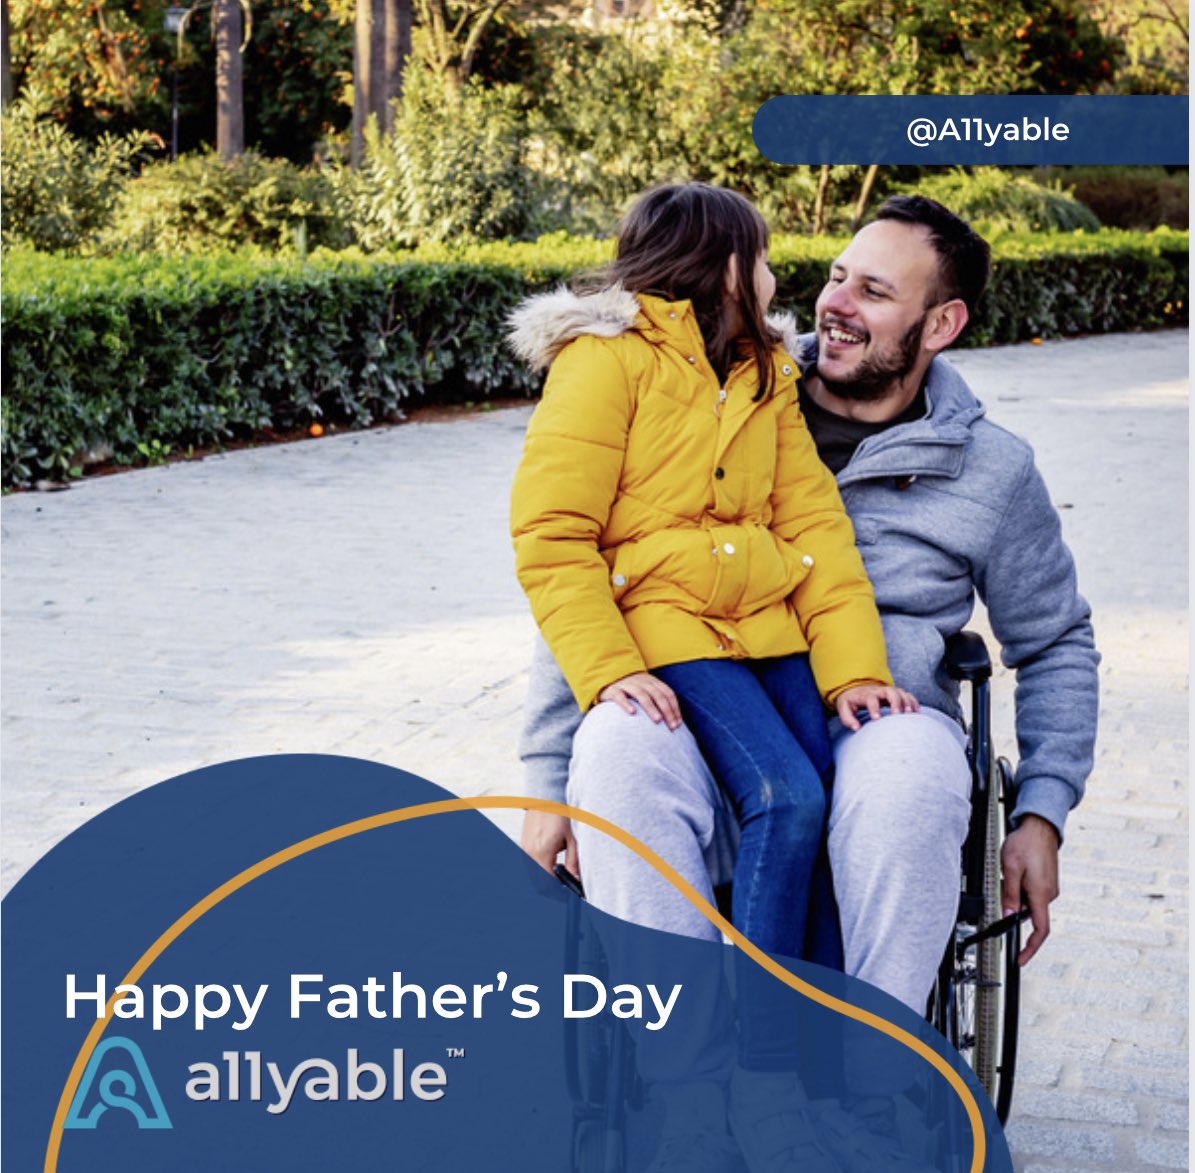 🎉 Happy Father's Day to all dads, including those with disabilities! Your love and strength inspire us all. #FathersDay #InclusiveParenting #a11yable #a11y #superhero